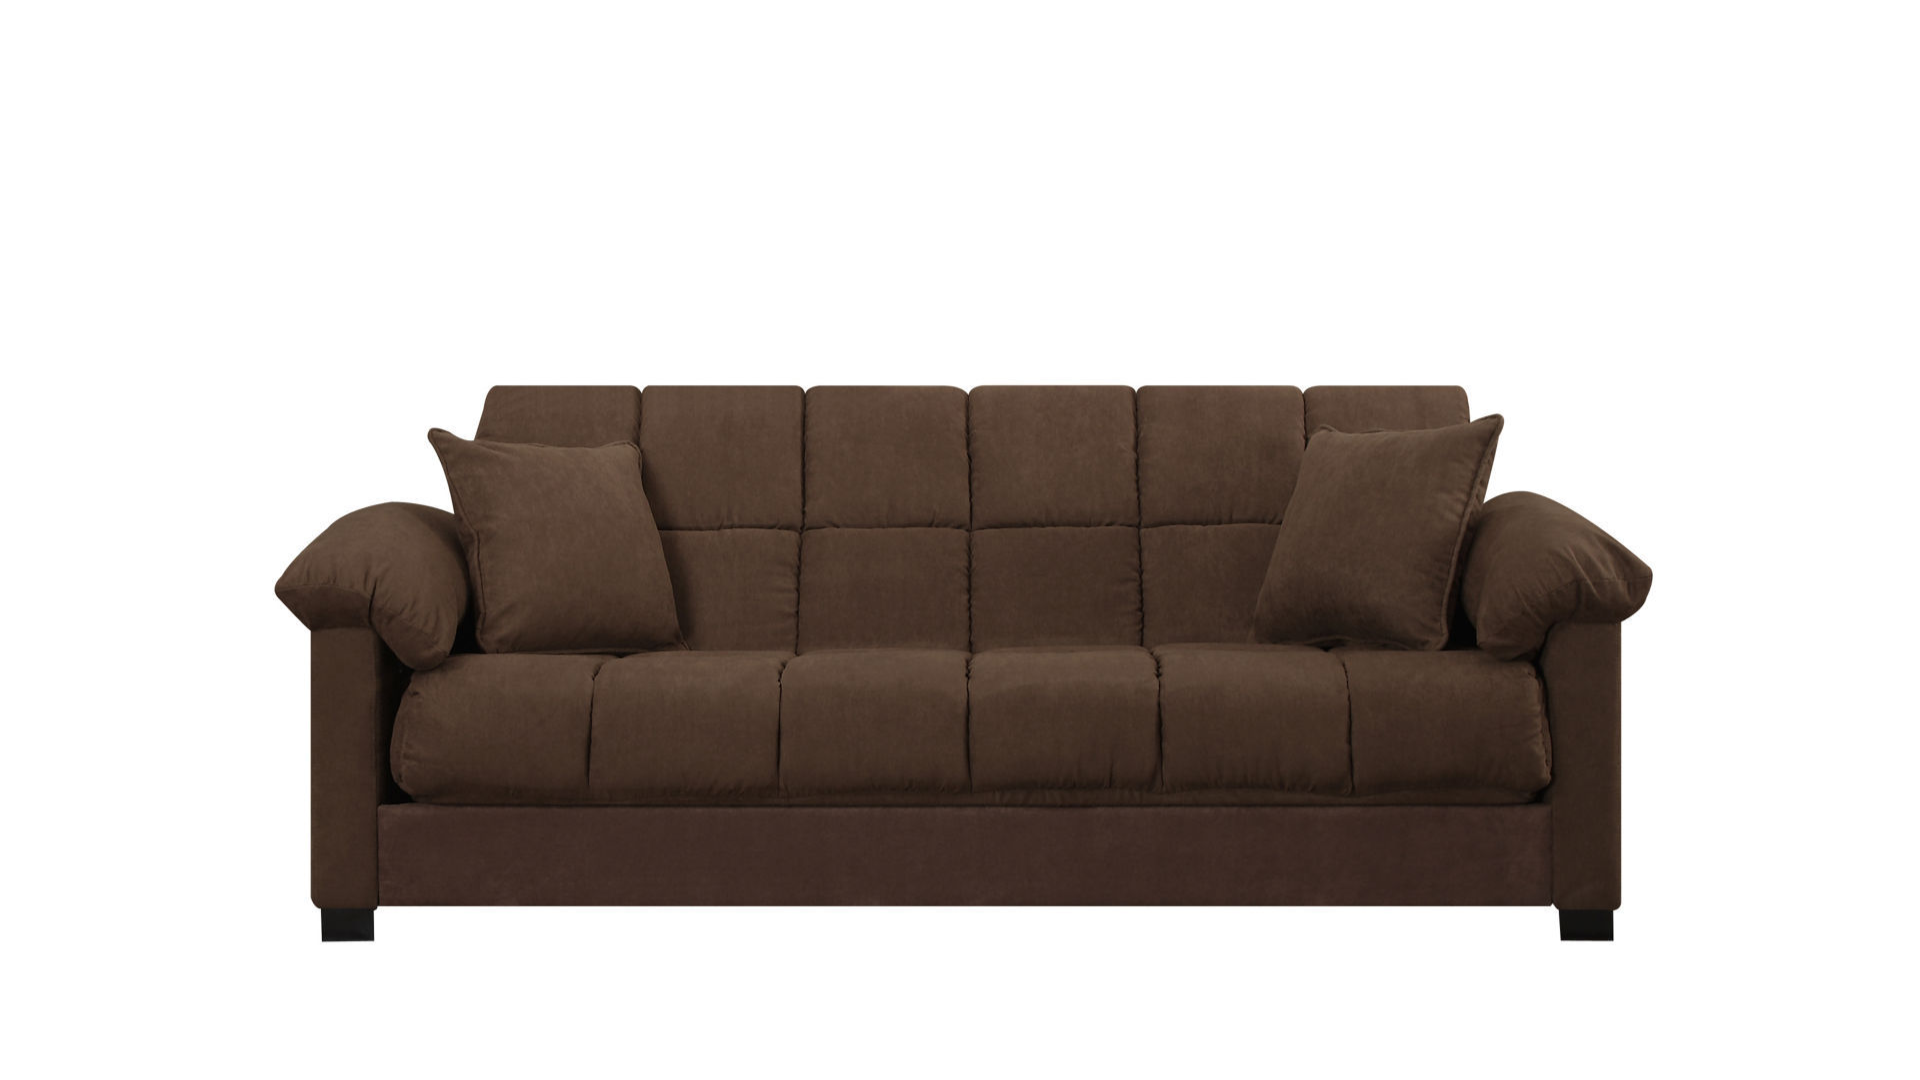 Taylor pillow-top microfiber convert-a-couch for $299 with code